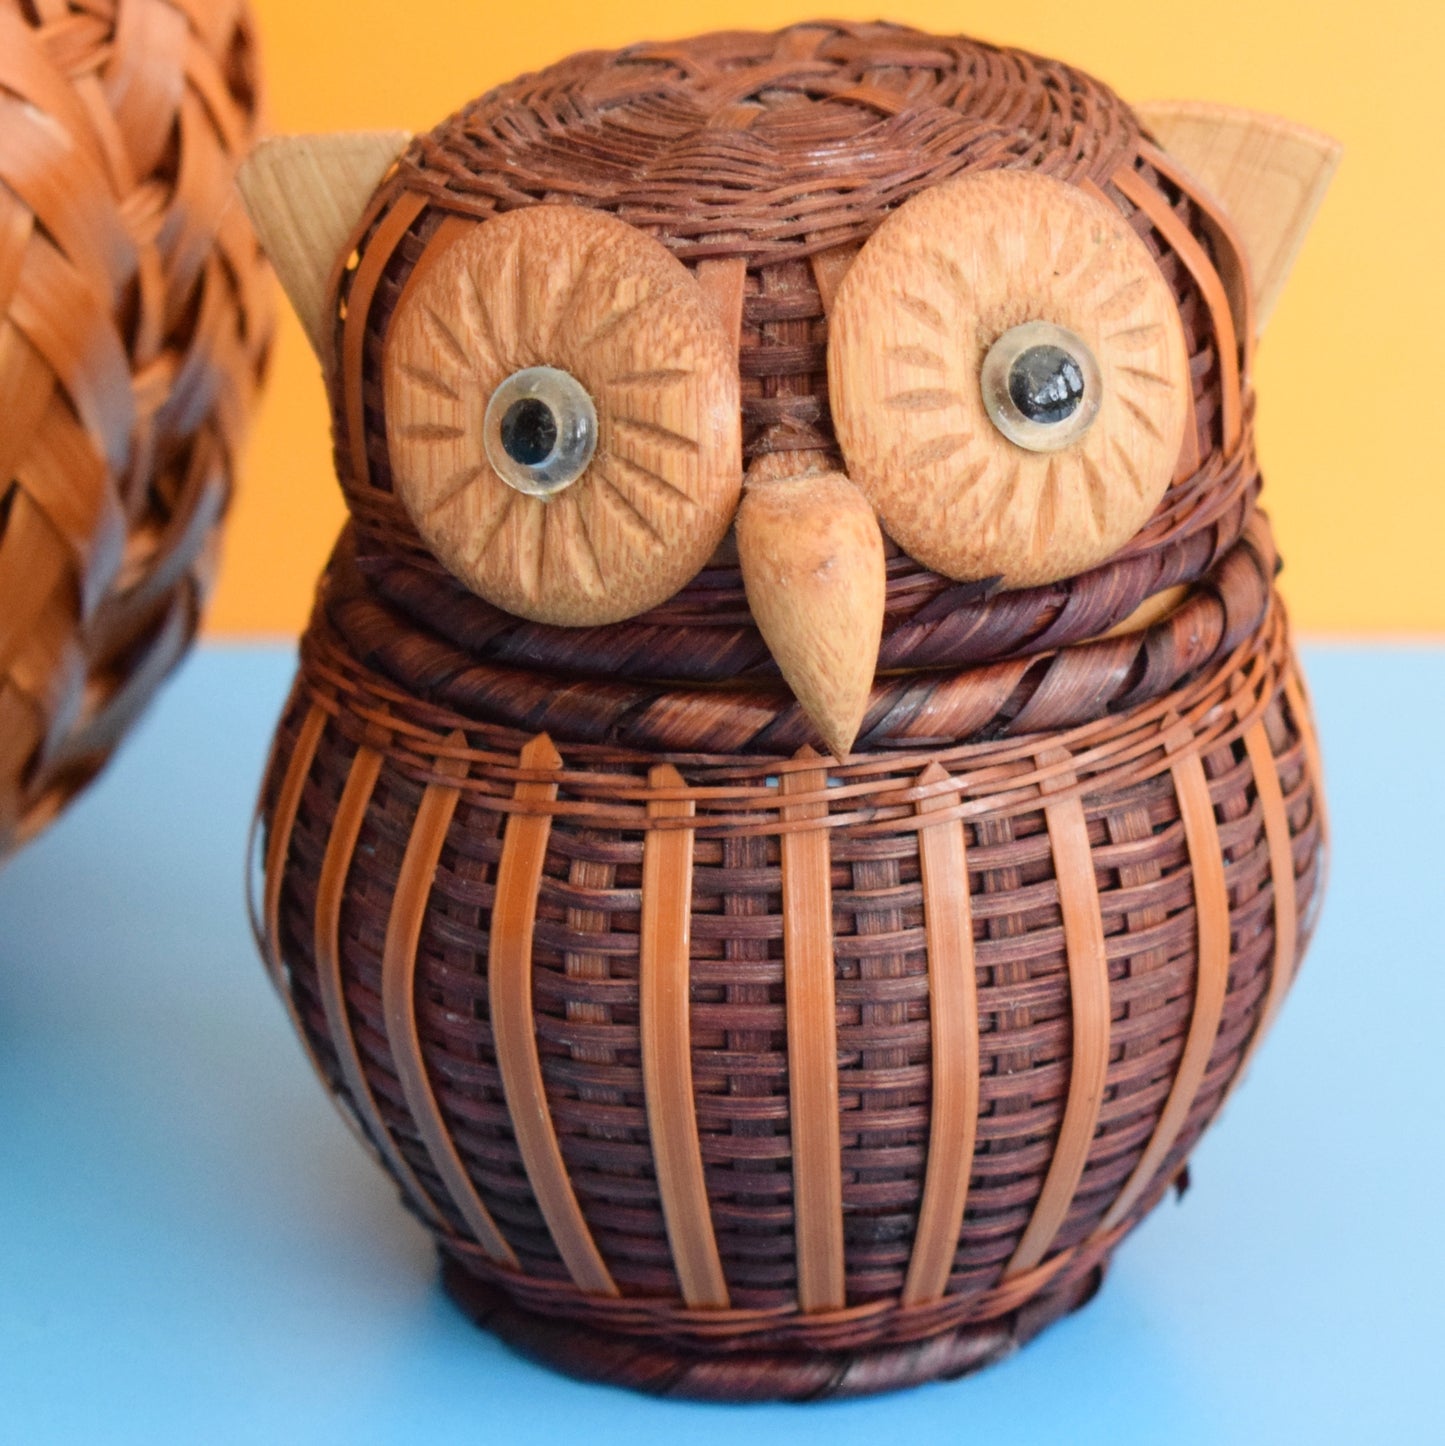 Vintage 1970s Kitsch Owl Shaped Containers